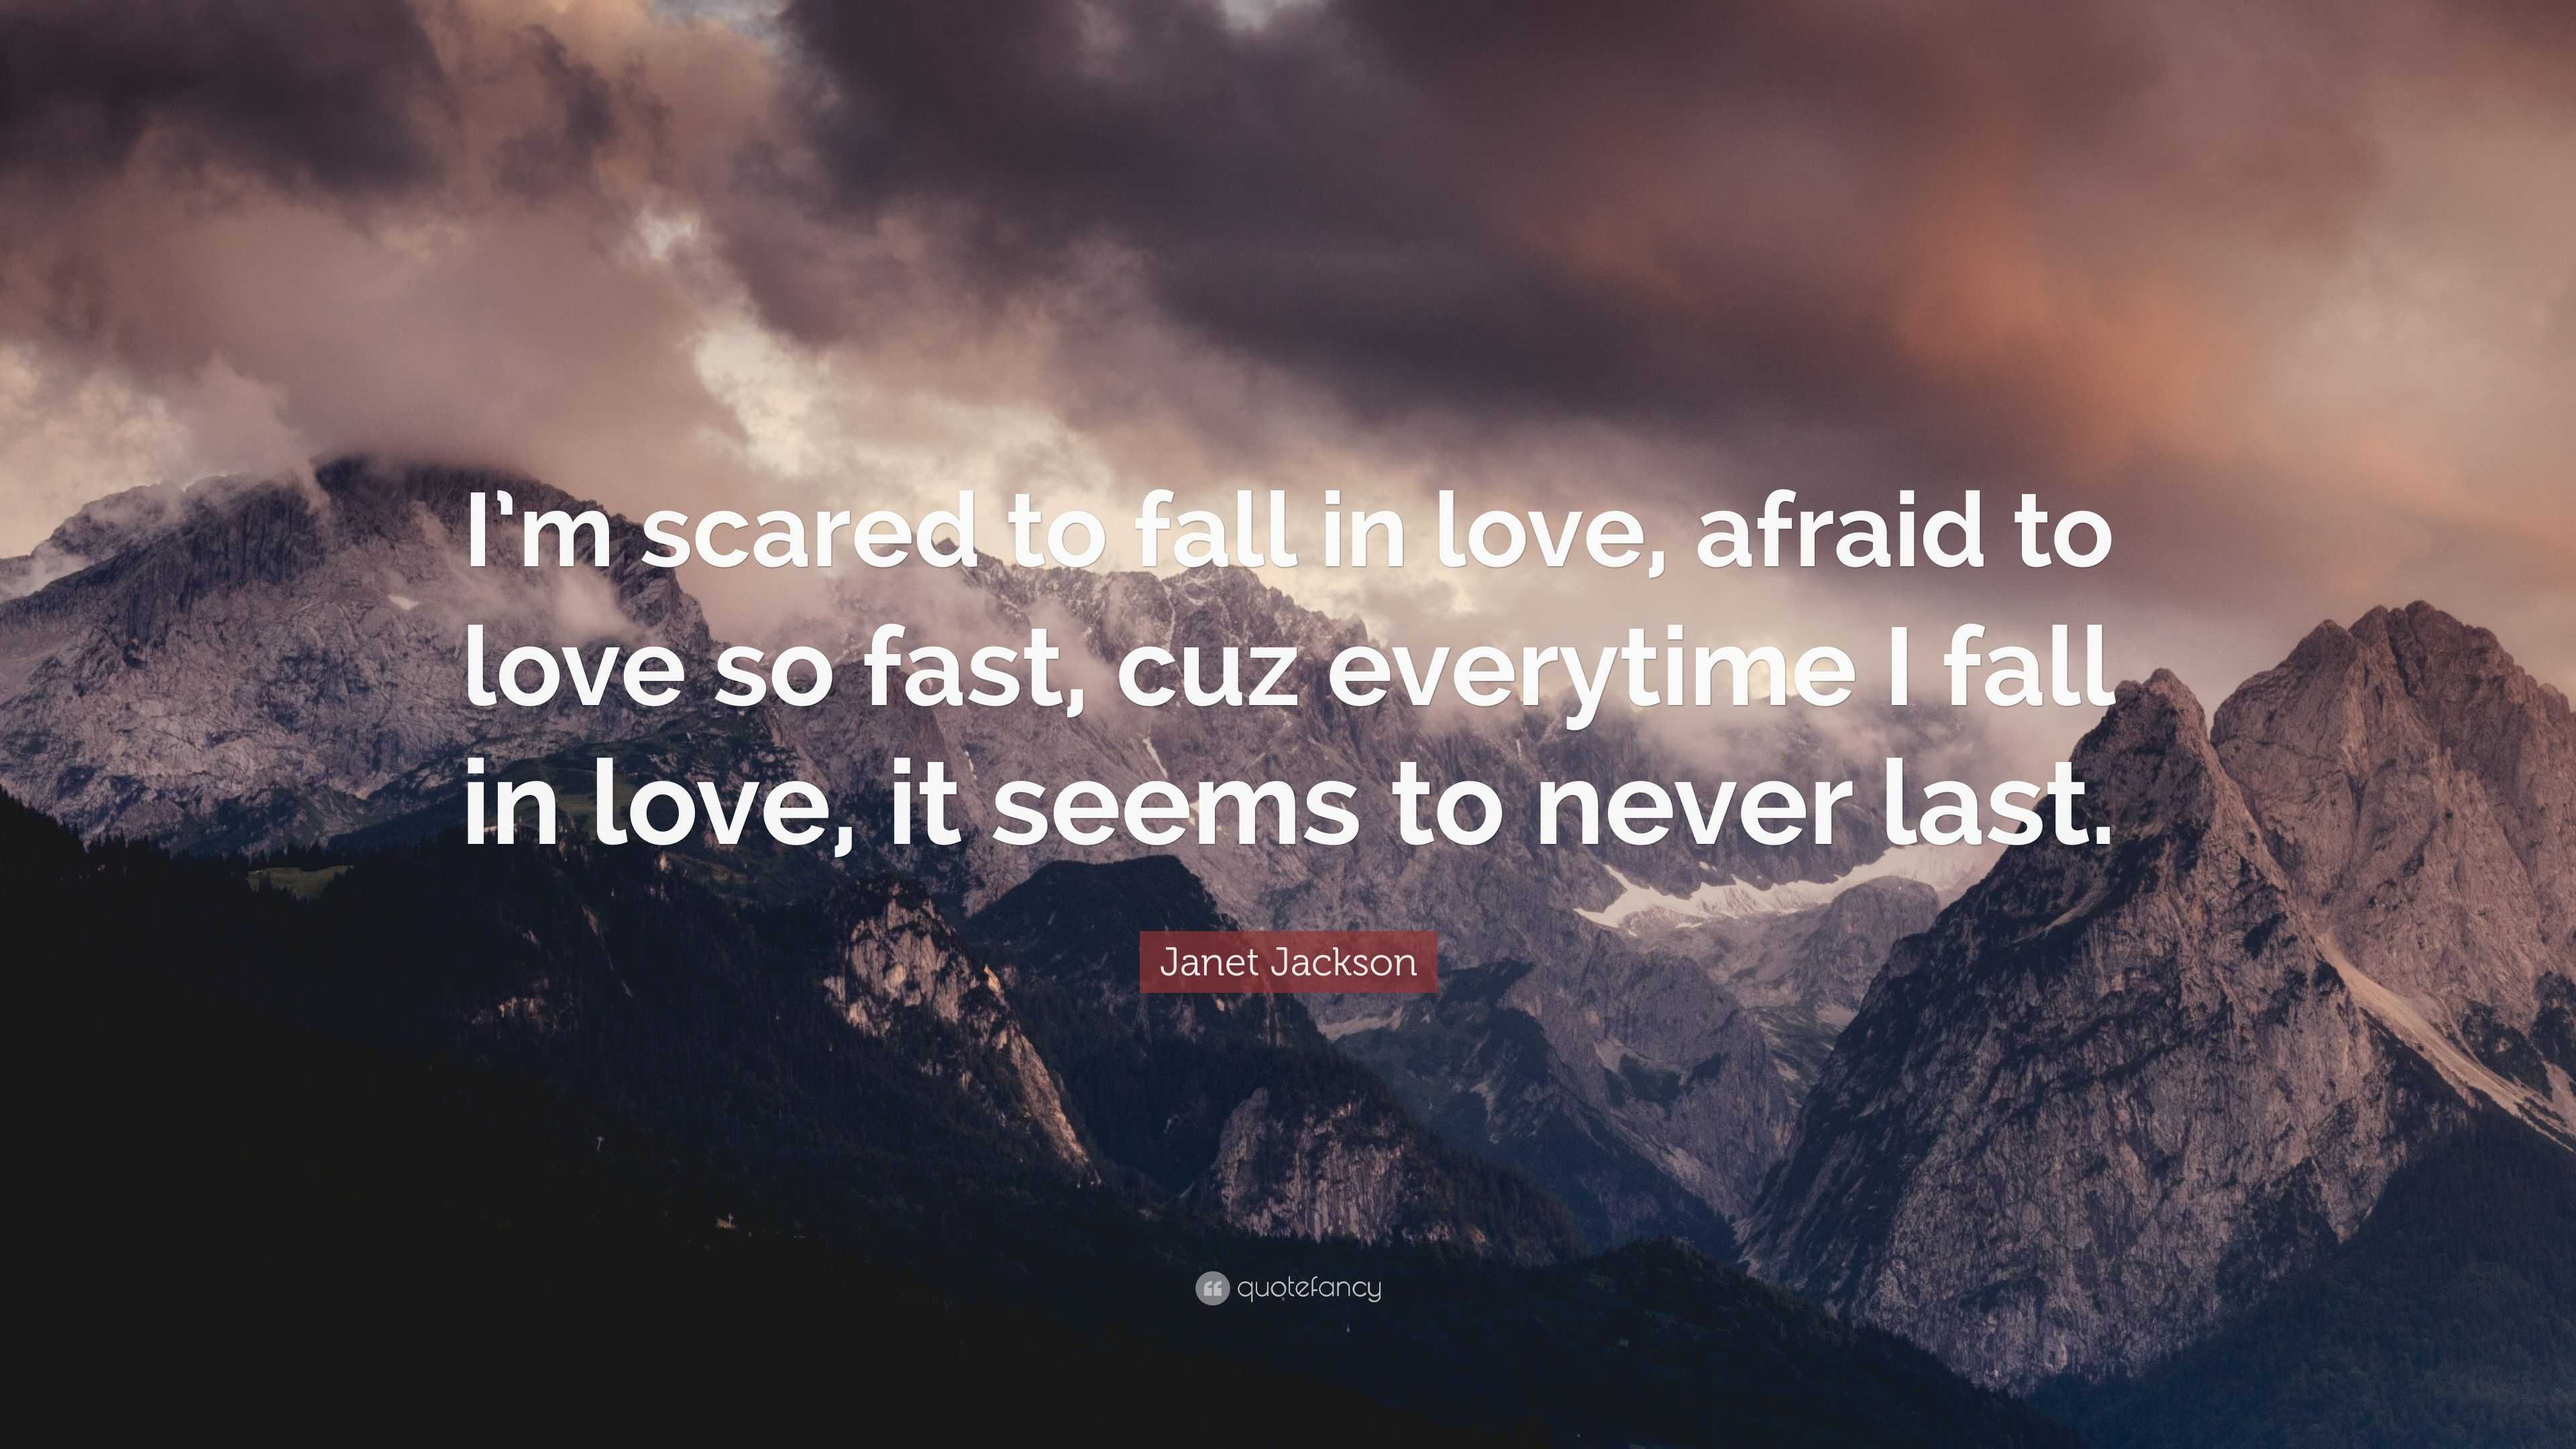 Janet Jackson Quote “I m scared to fall in love afraid to